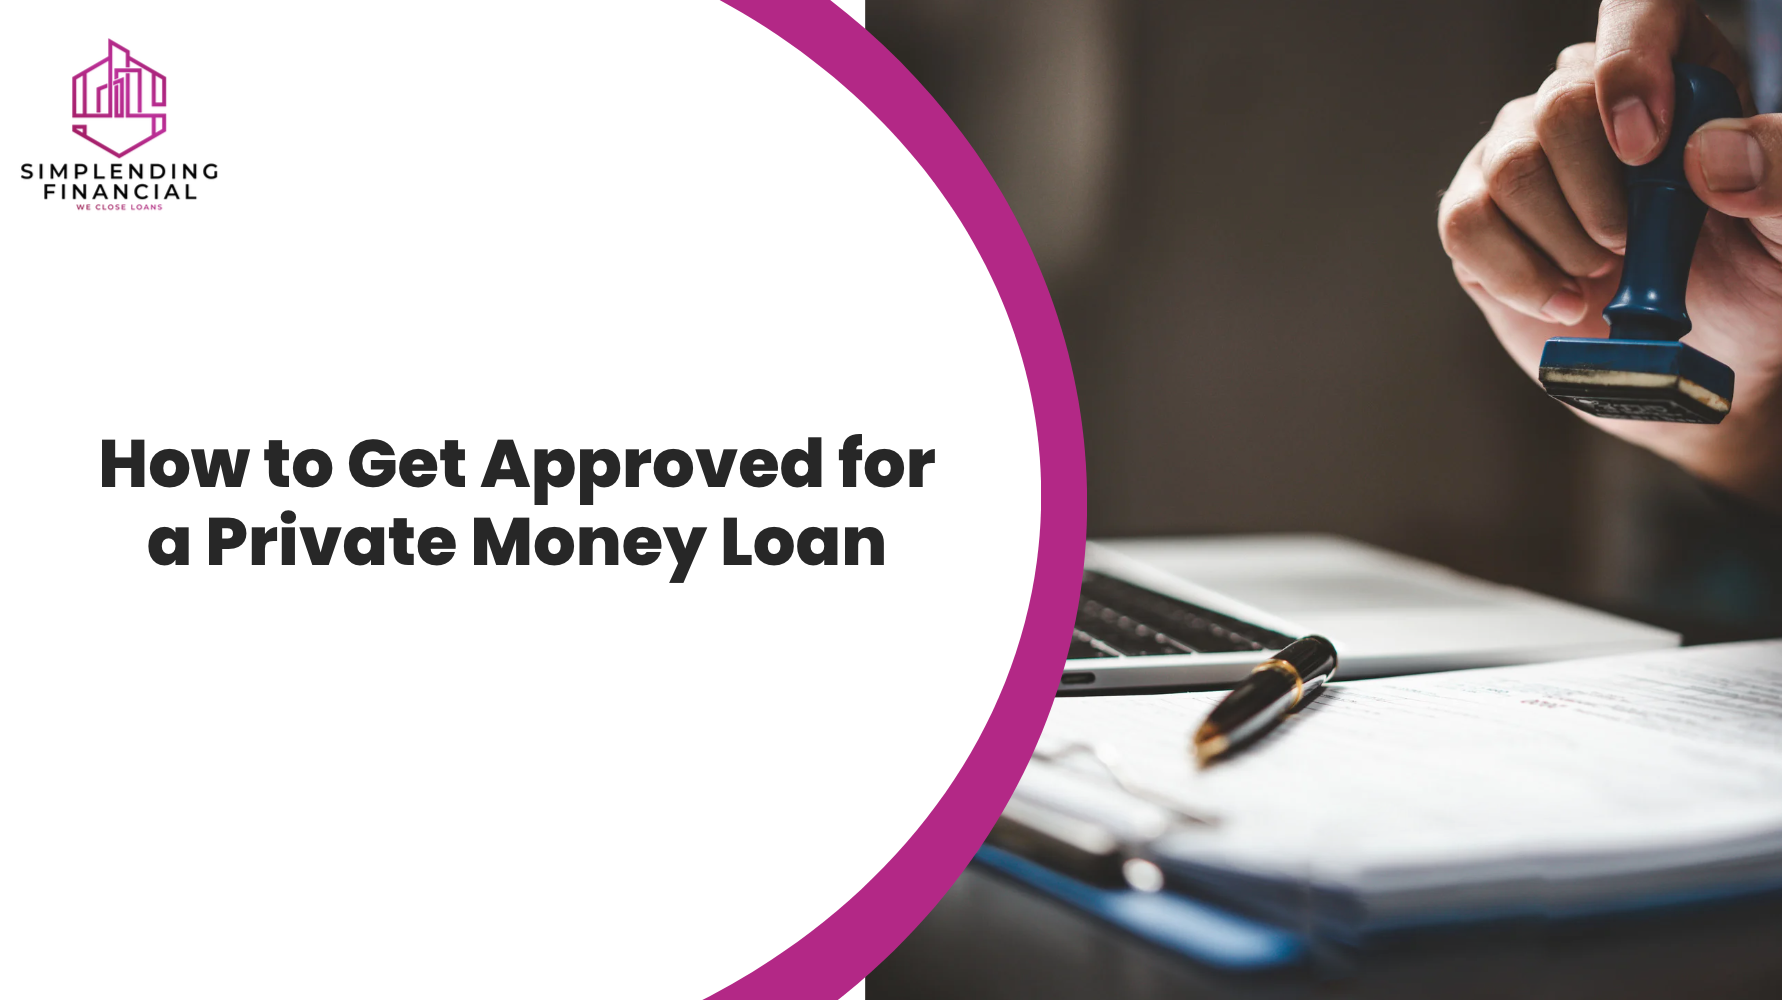 How to Get Approved for a Private Money Loan